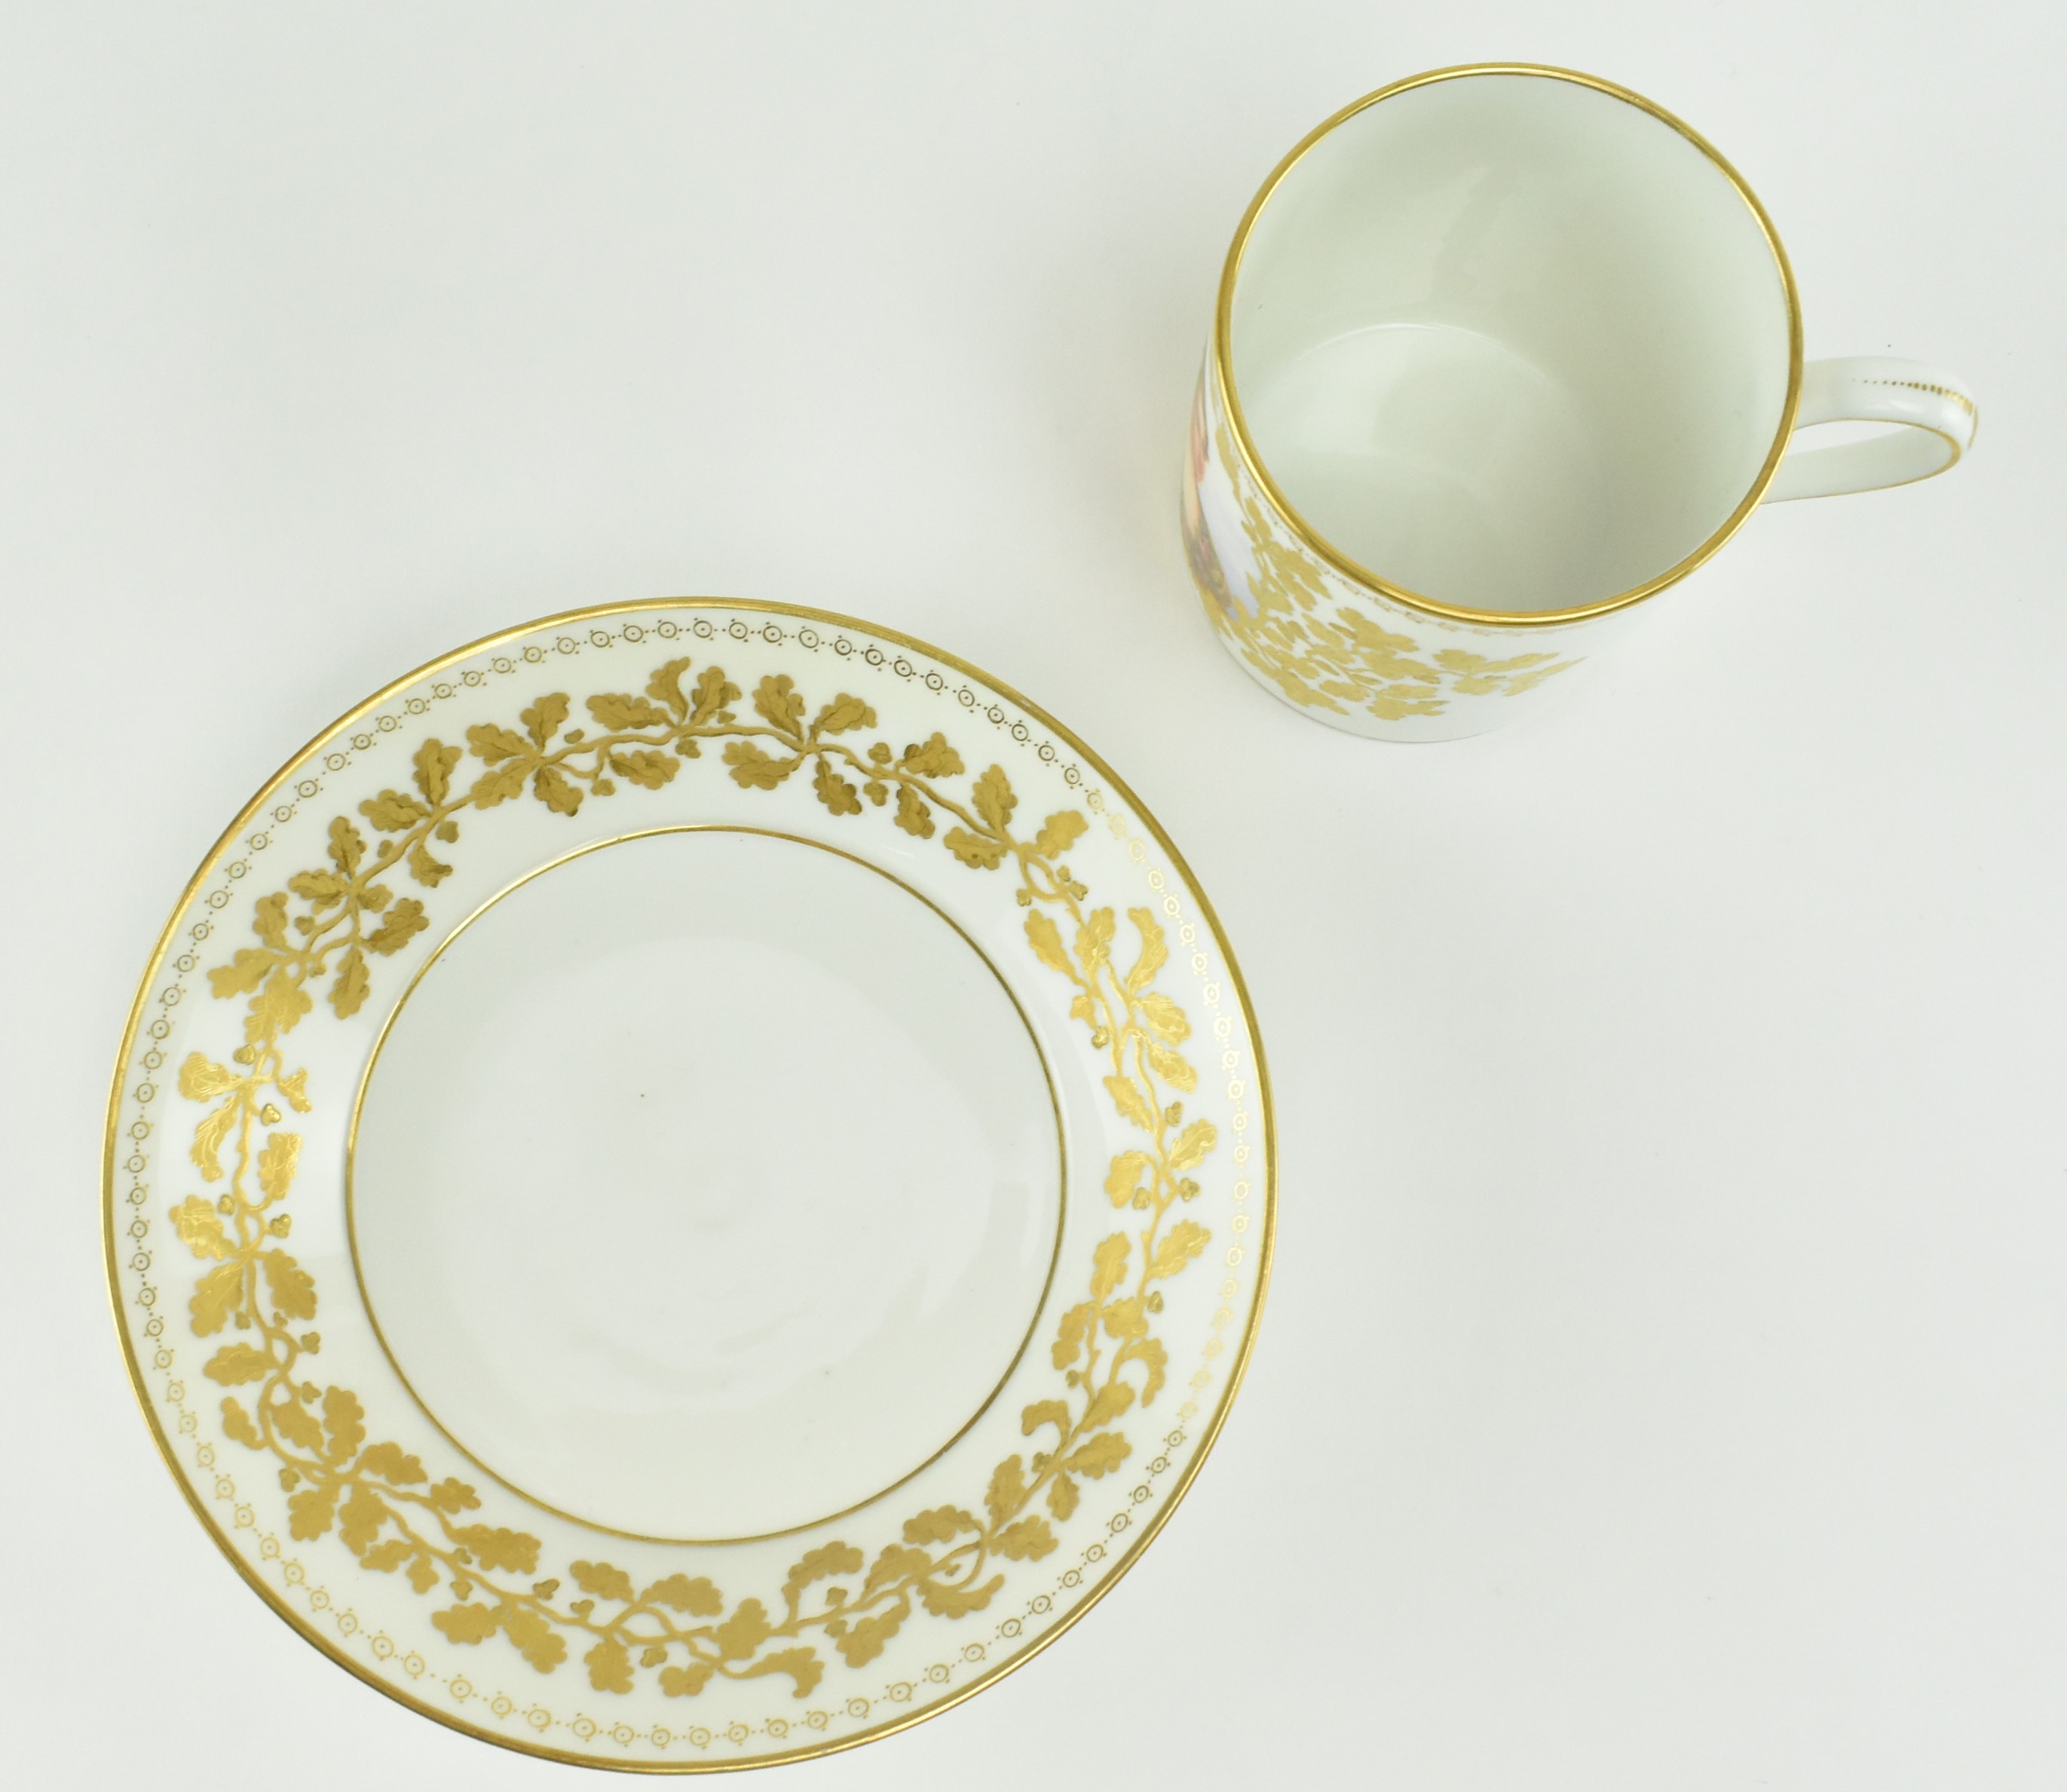 FRENCH - SEVRES LOUIS PHILIPPE - M. DE PARABIRE CUP & SAUCER - Image 5 of 8